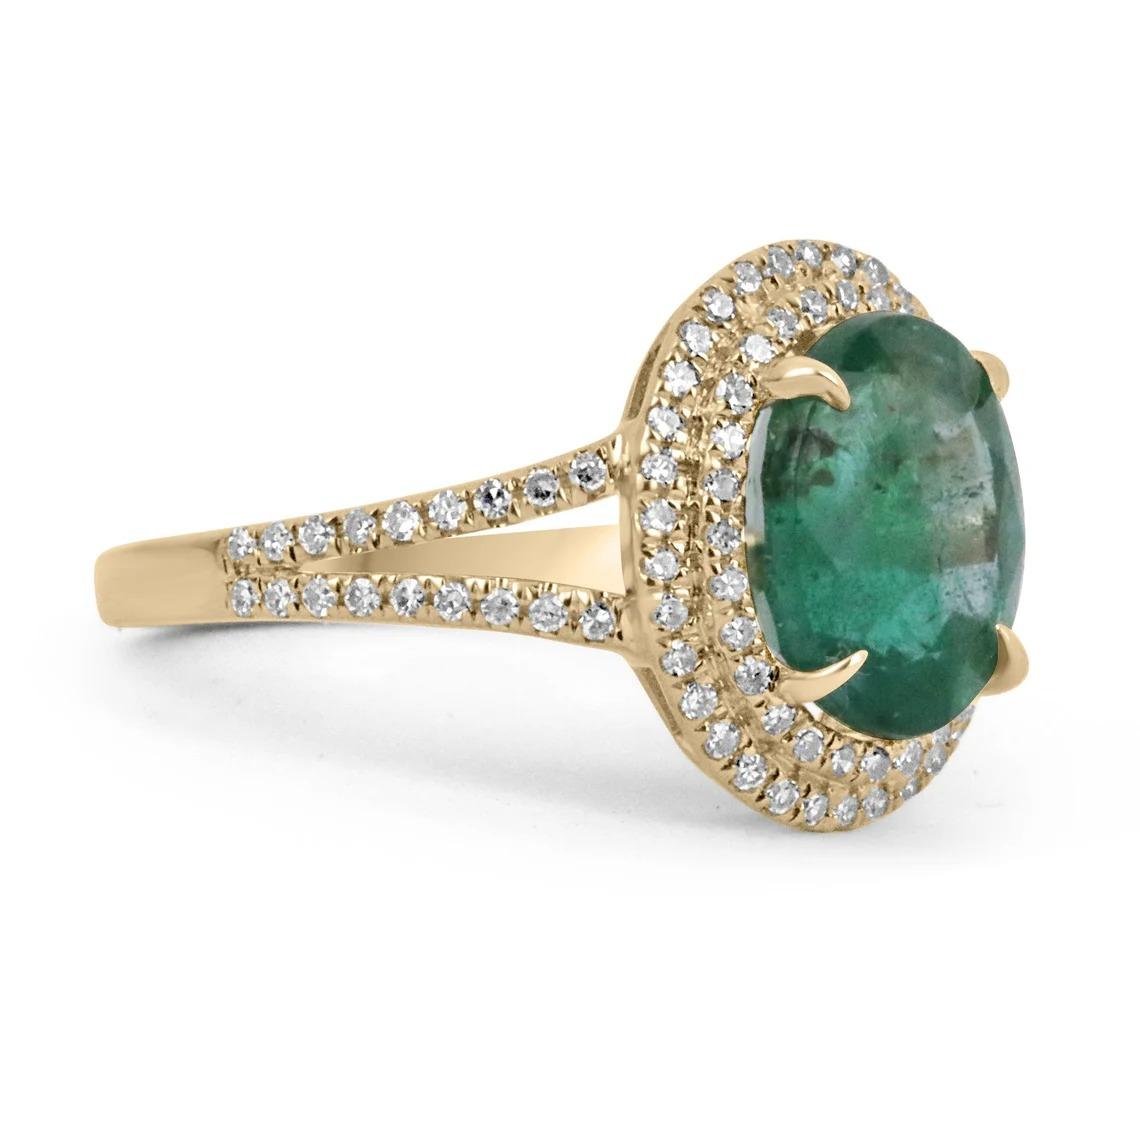 Featured is a stunning emerald and diamond ring. The center gemstone showcases a beautiful 3.80-carat, natural oval cut emerald from the origin of Zambia. Displaying a gorgeous and lush dark green color, with a yellow hue to it. Surrounding this